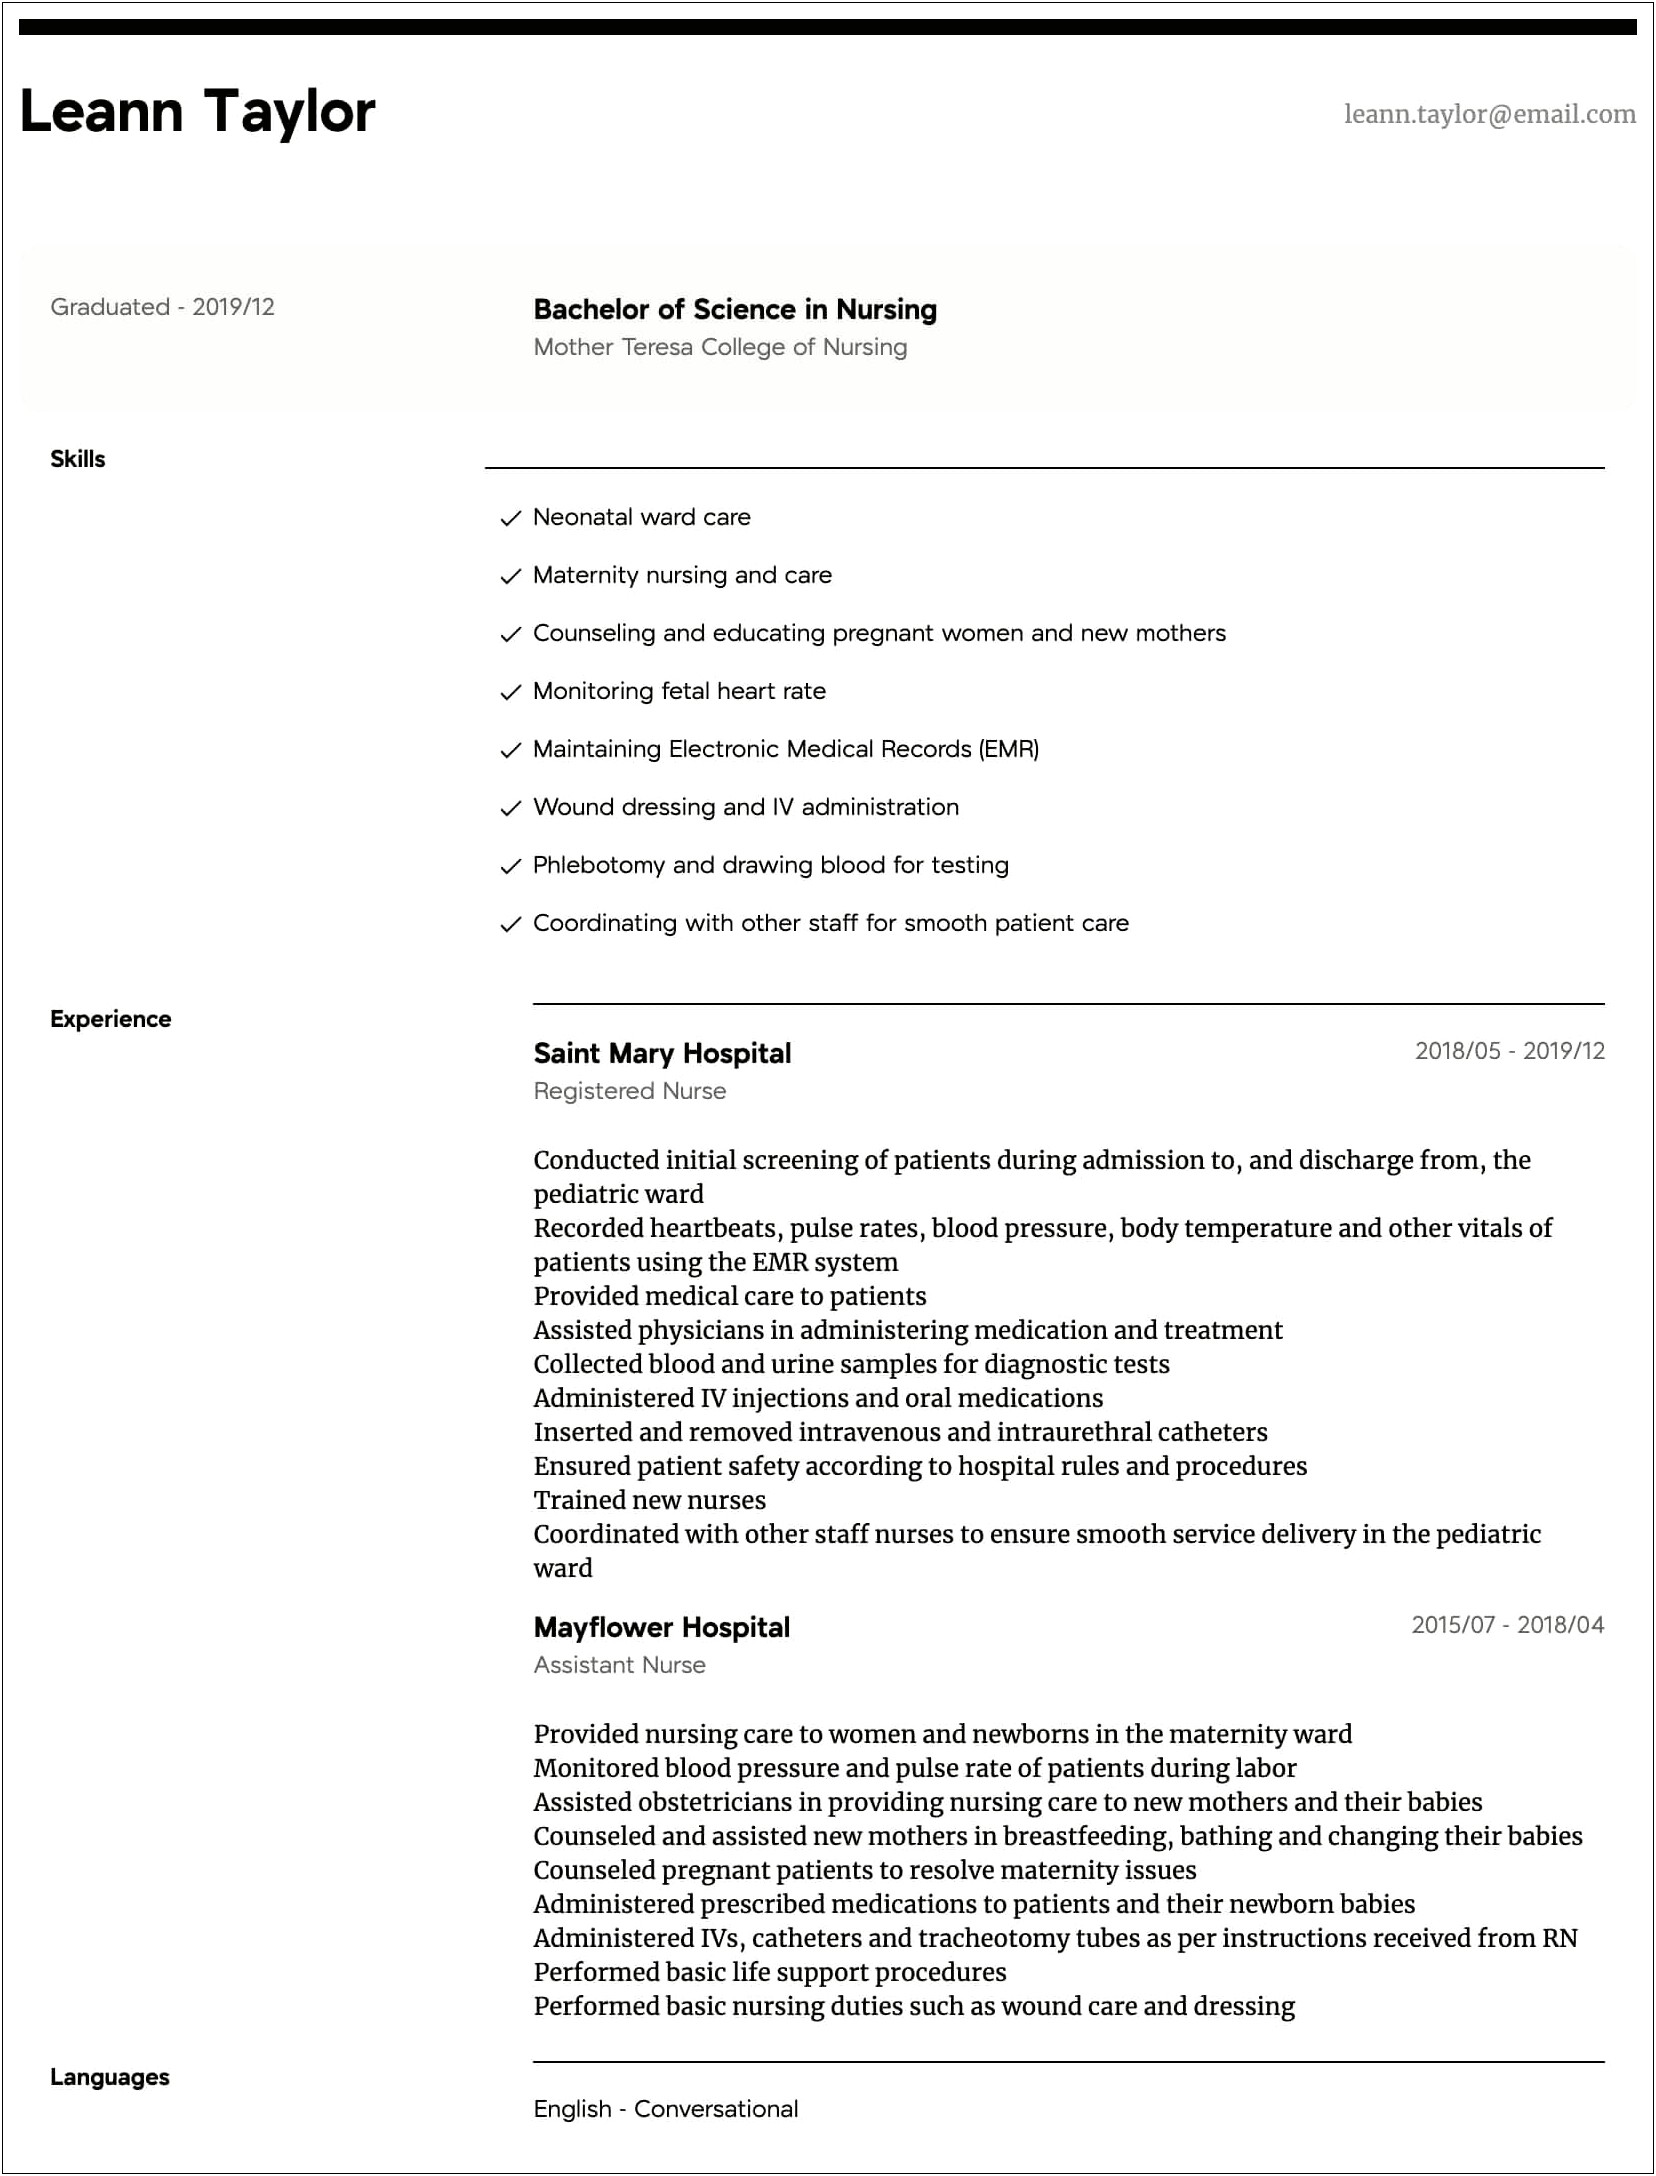 Examples Of Resumes To Get Into Nursing School